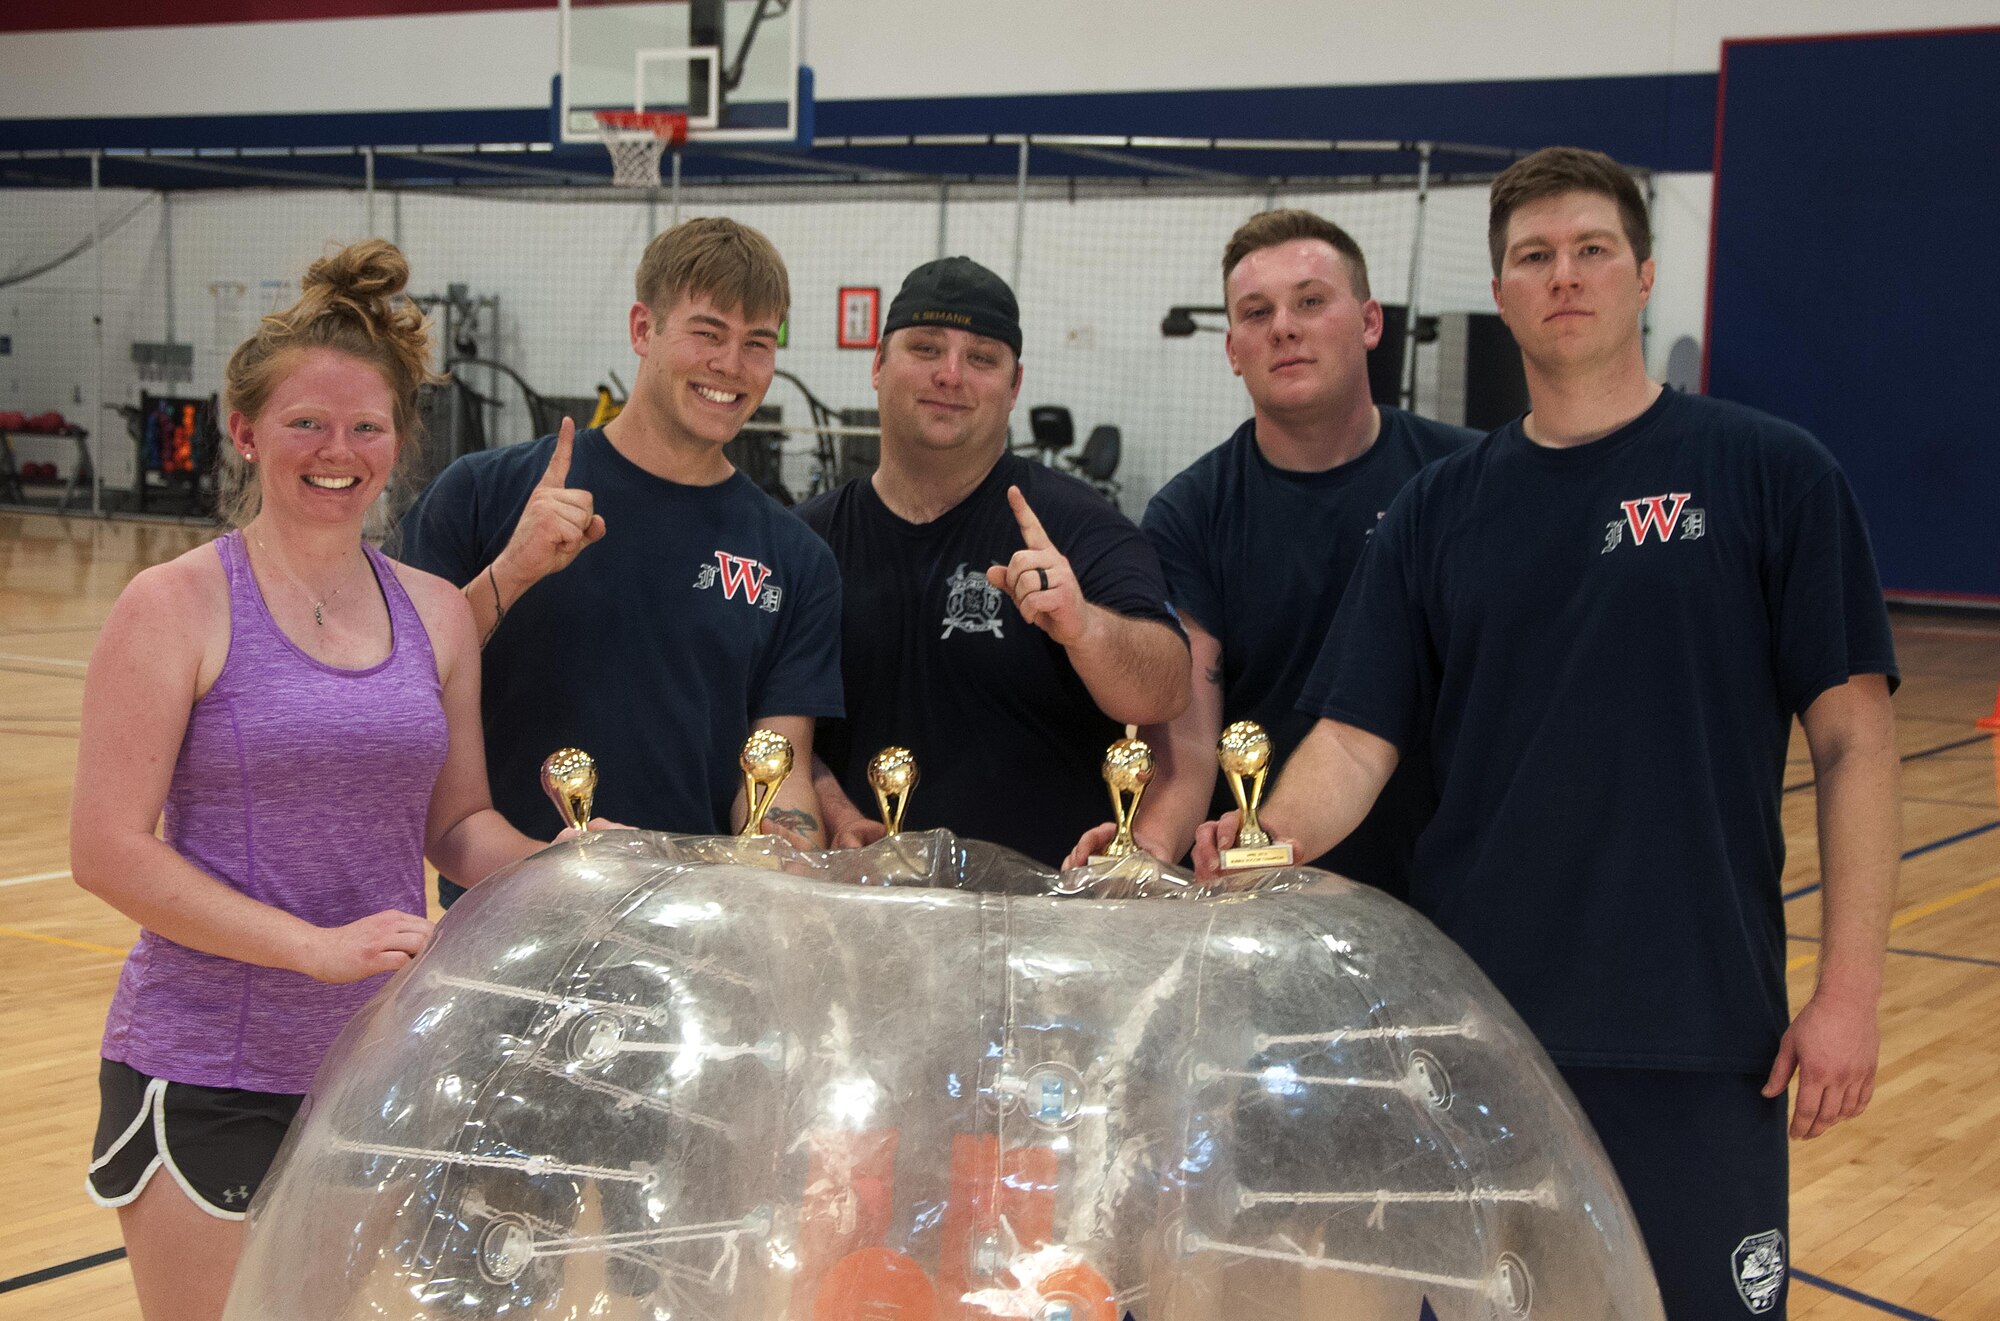 The team from the 90th Civil Engineer Squadron Fire Department pose after winning the championship of a bubble soccer tournament inside the Freedom Hall Fitness Center on F.E. Warren Air Force Base, Wyo., April 22, 2016. The team went undefeated through five games to claim victory. (U.S. Air Force photo by Senior Airman Brandon Valle)